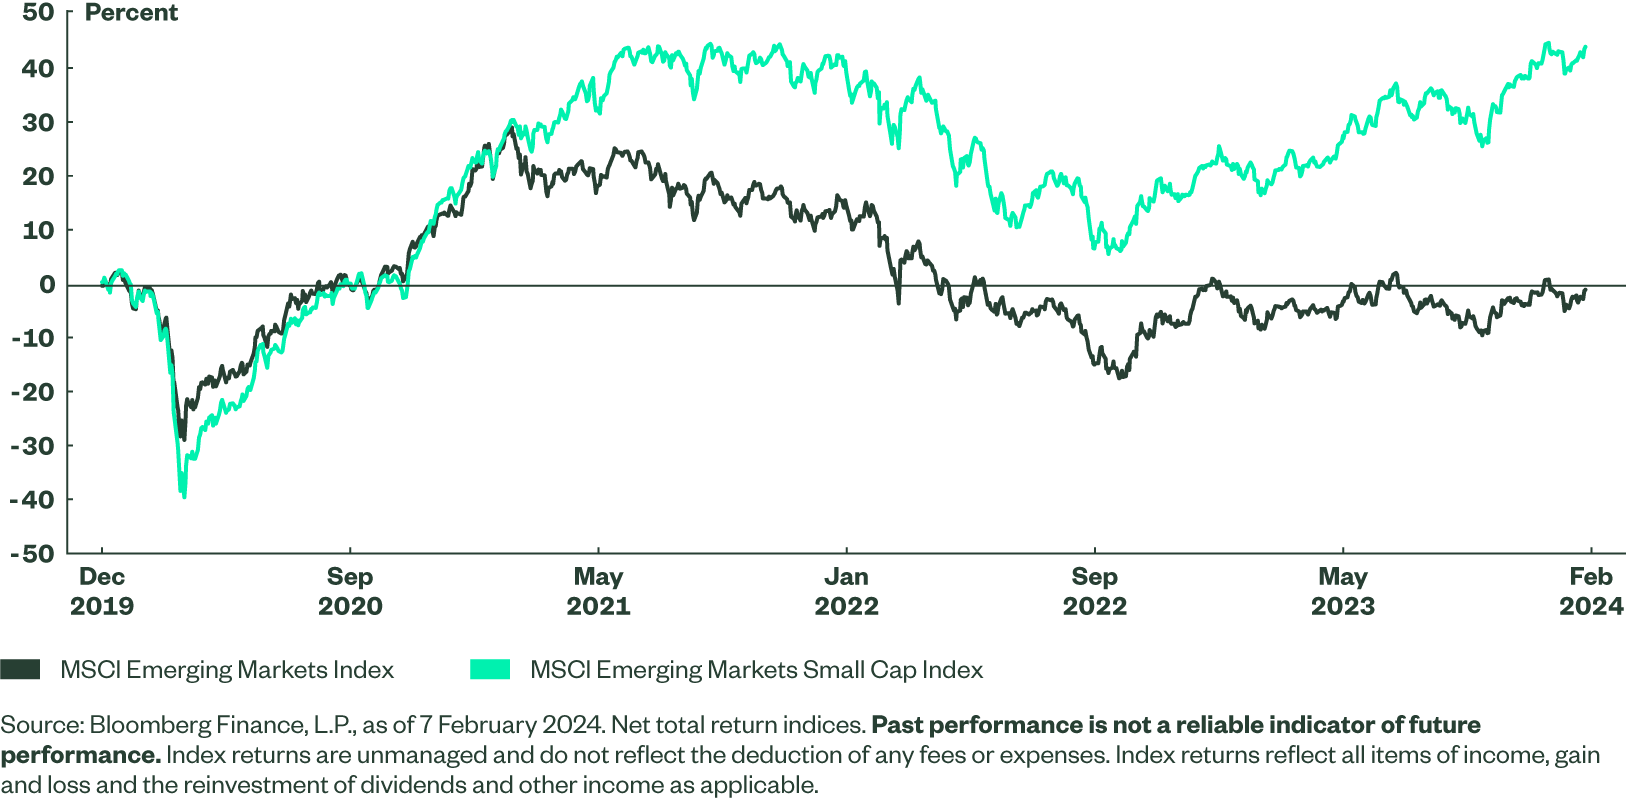 A line chart showing performance for both the MSCI Emerging Markets Index and the MSCI EM Small Cap Index over the past three years.